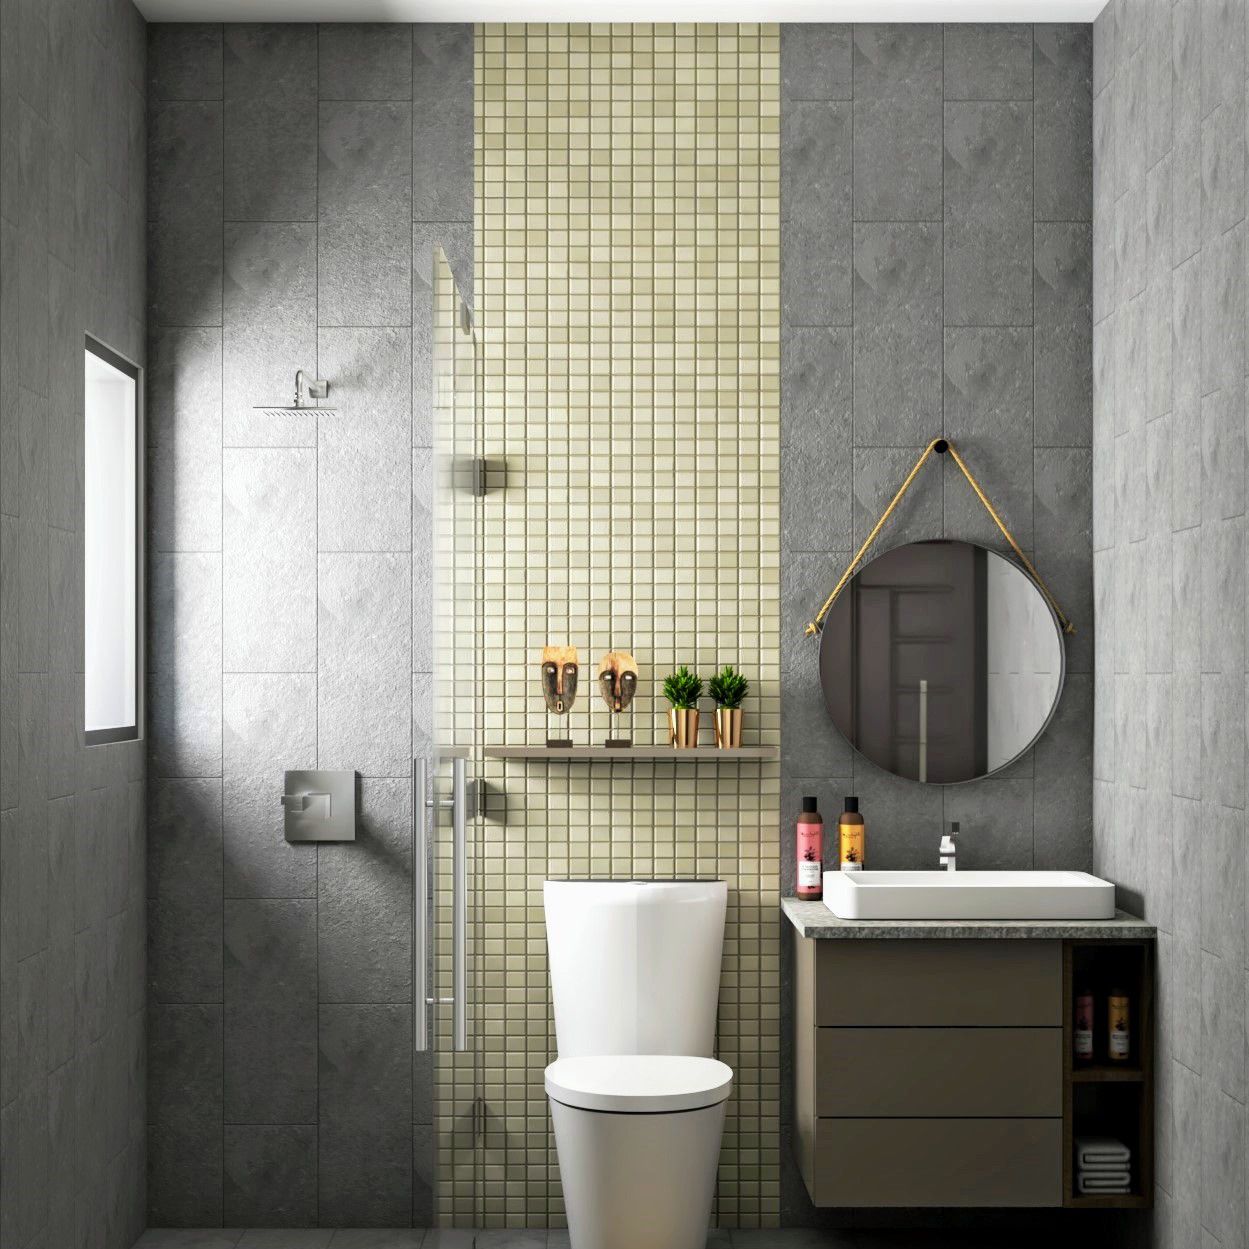 Contemporary Stepladder And Checkerboard Porcelain Bathroom Tile Design In Grey And Green